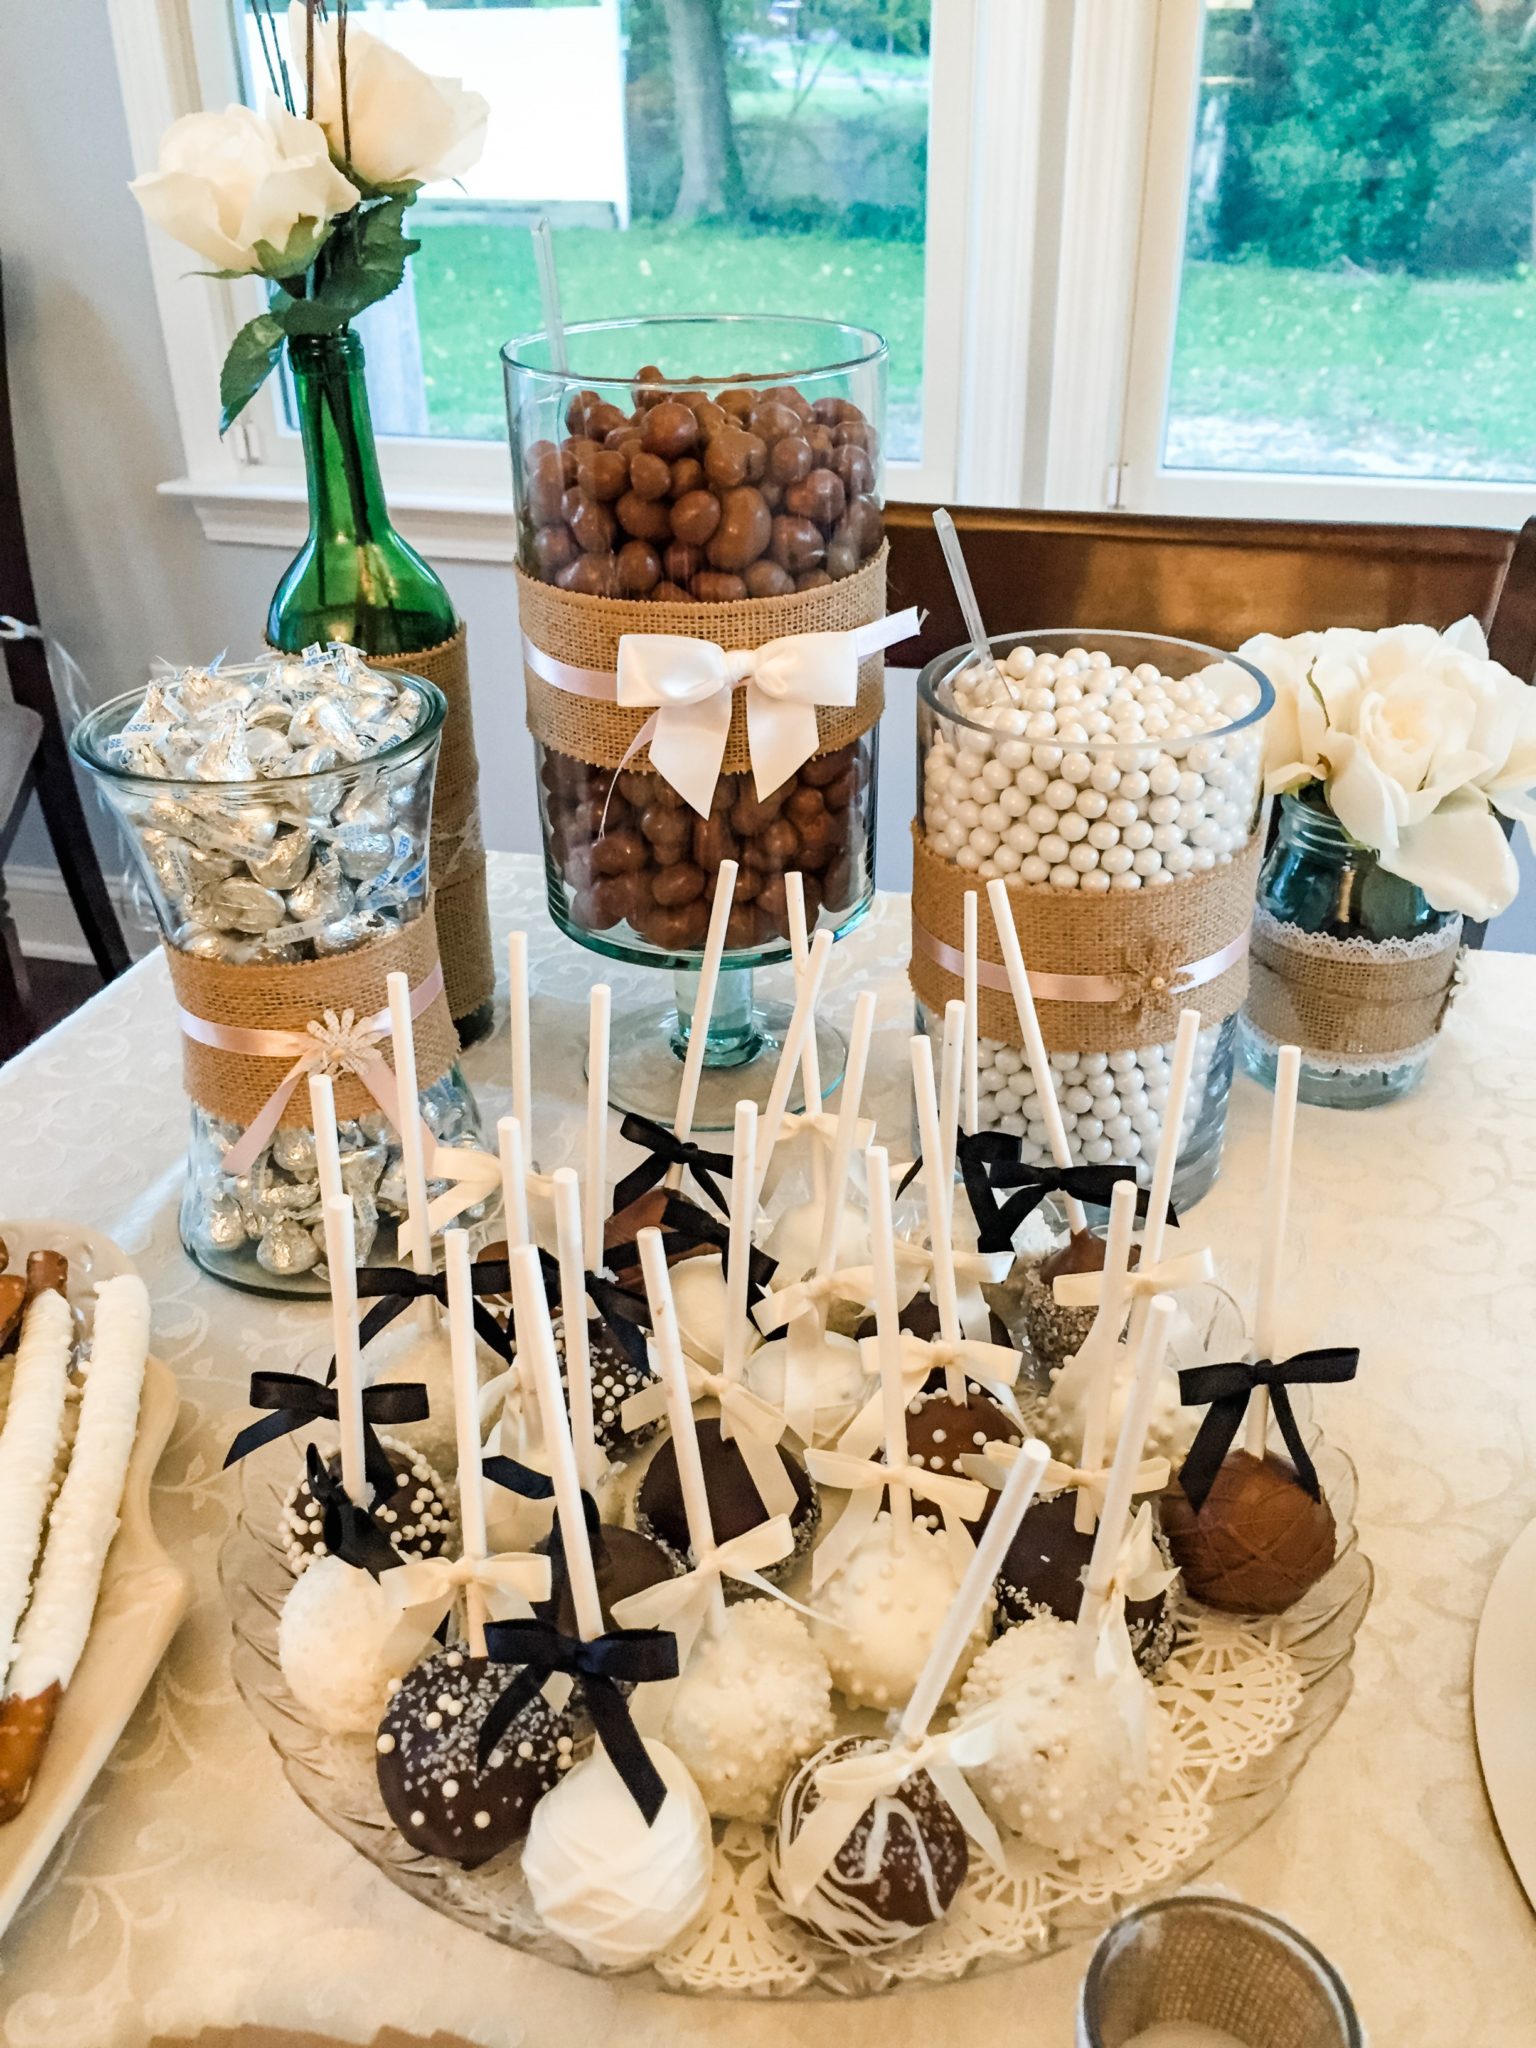 A custom dessert table at a bridal shower featuring assorted jars filled with candy and chocolate treats.